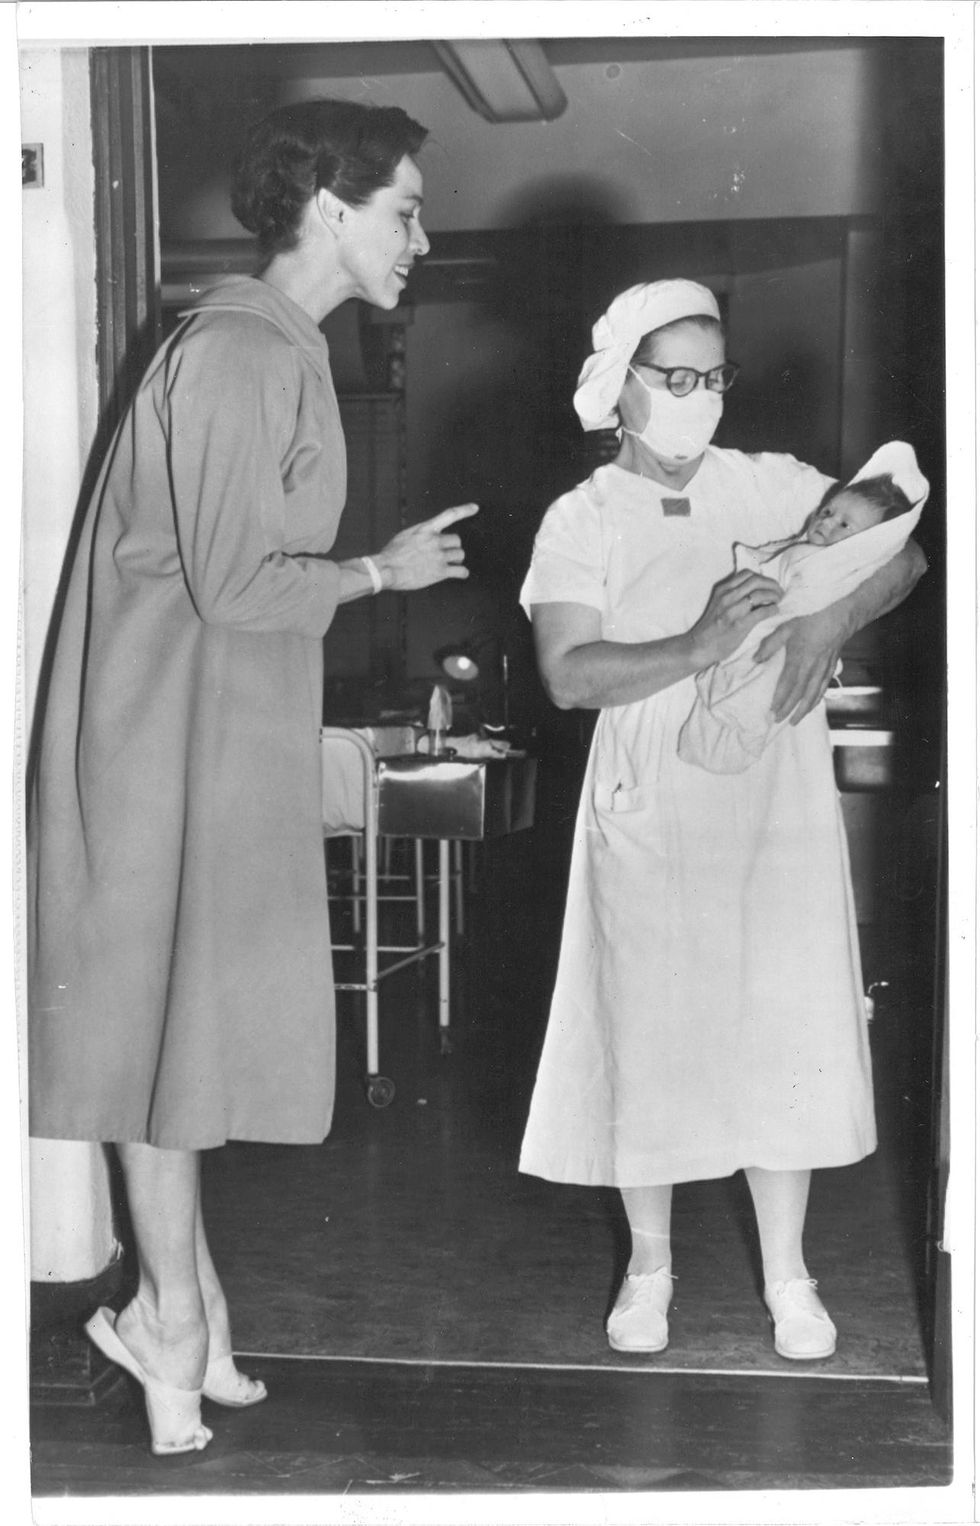 Maria Tallchief relevu00e9s out of her heels and smiles in profile as she looks down at a newborn baby being held by a nurse in a white dress and face mask.